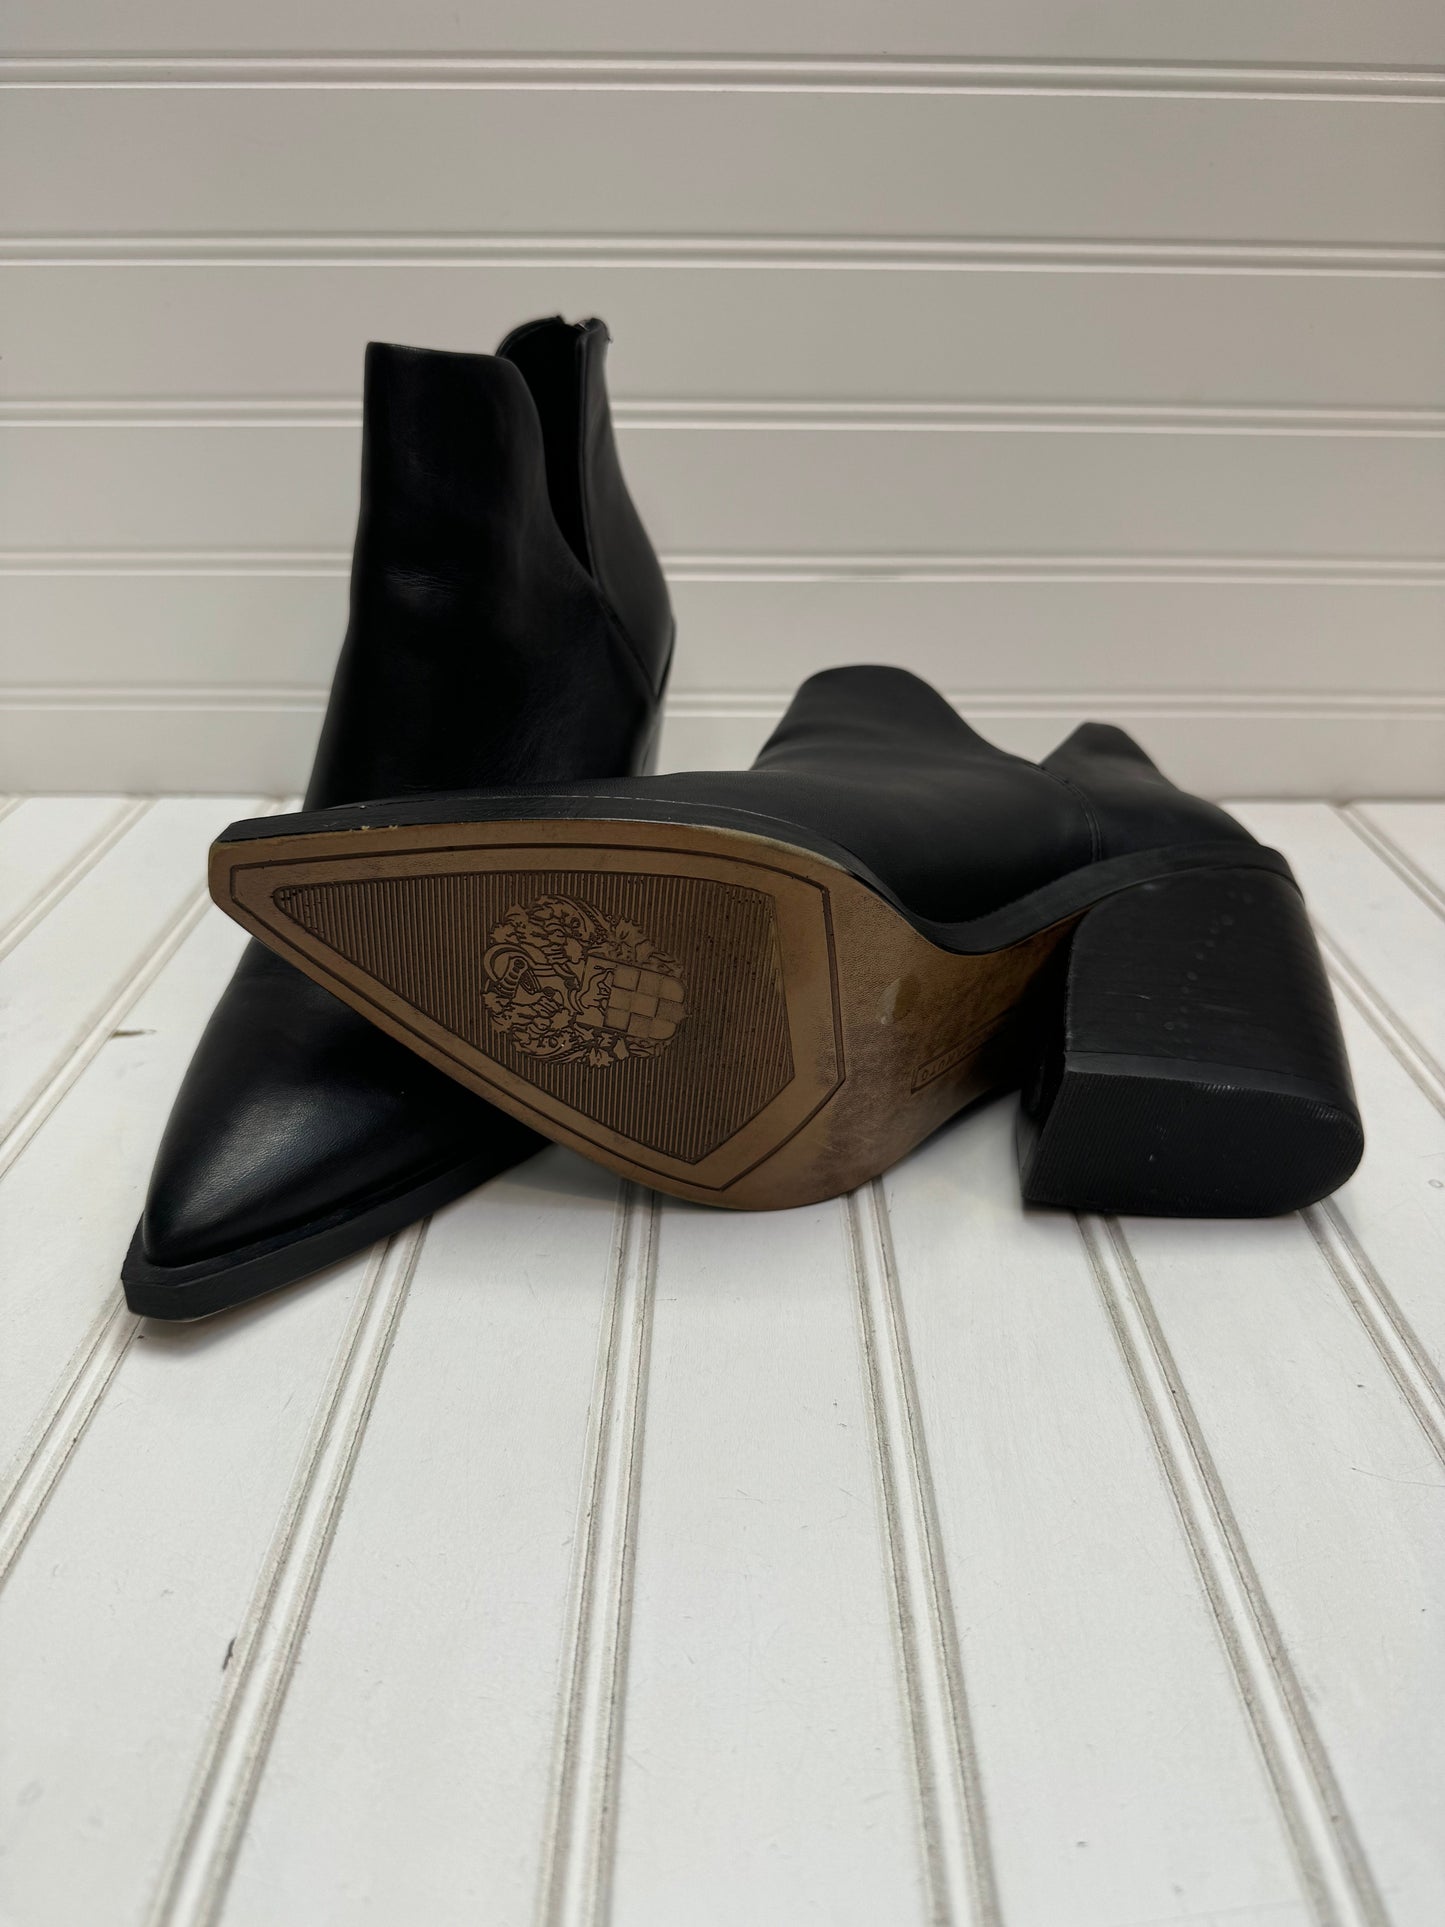 Black Boots Ankle Heels Vince Camuto, Size 8.5